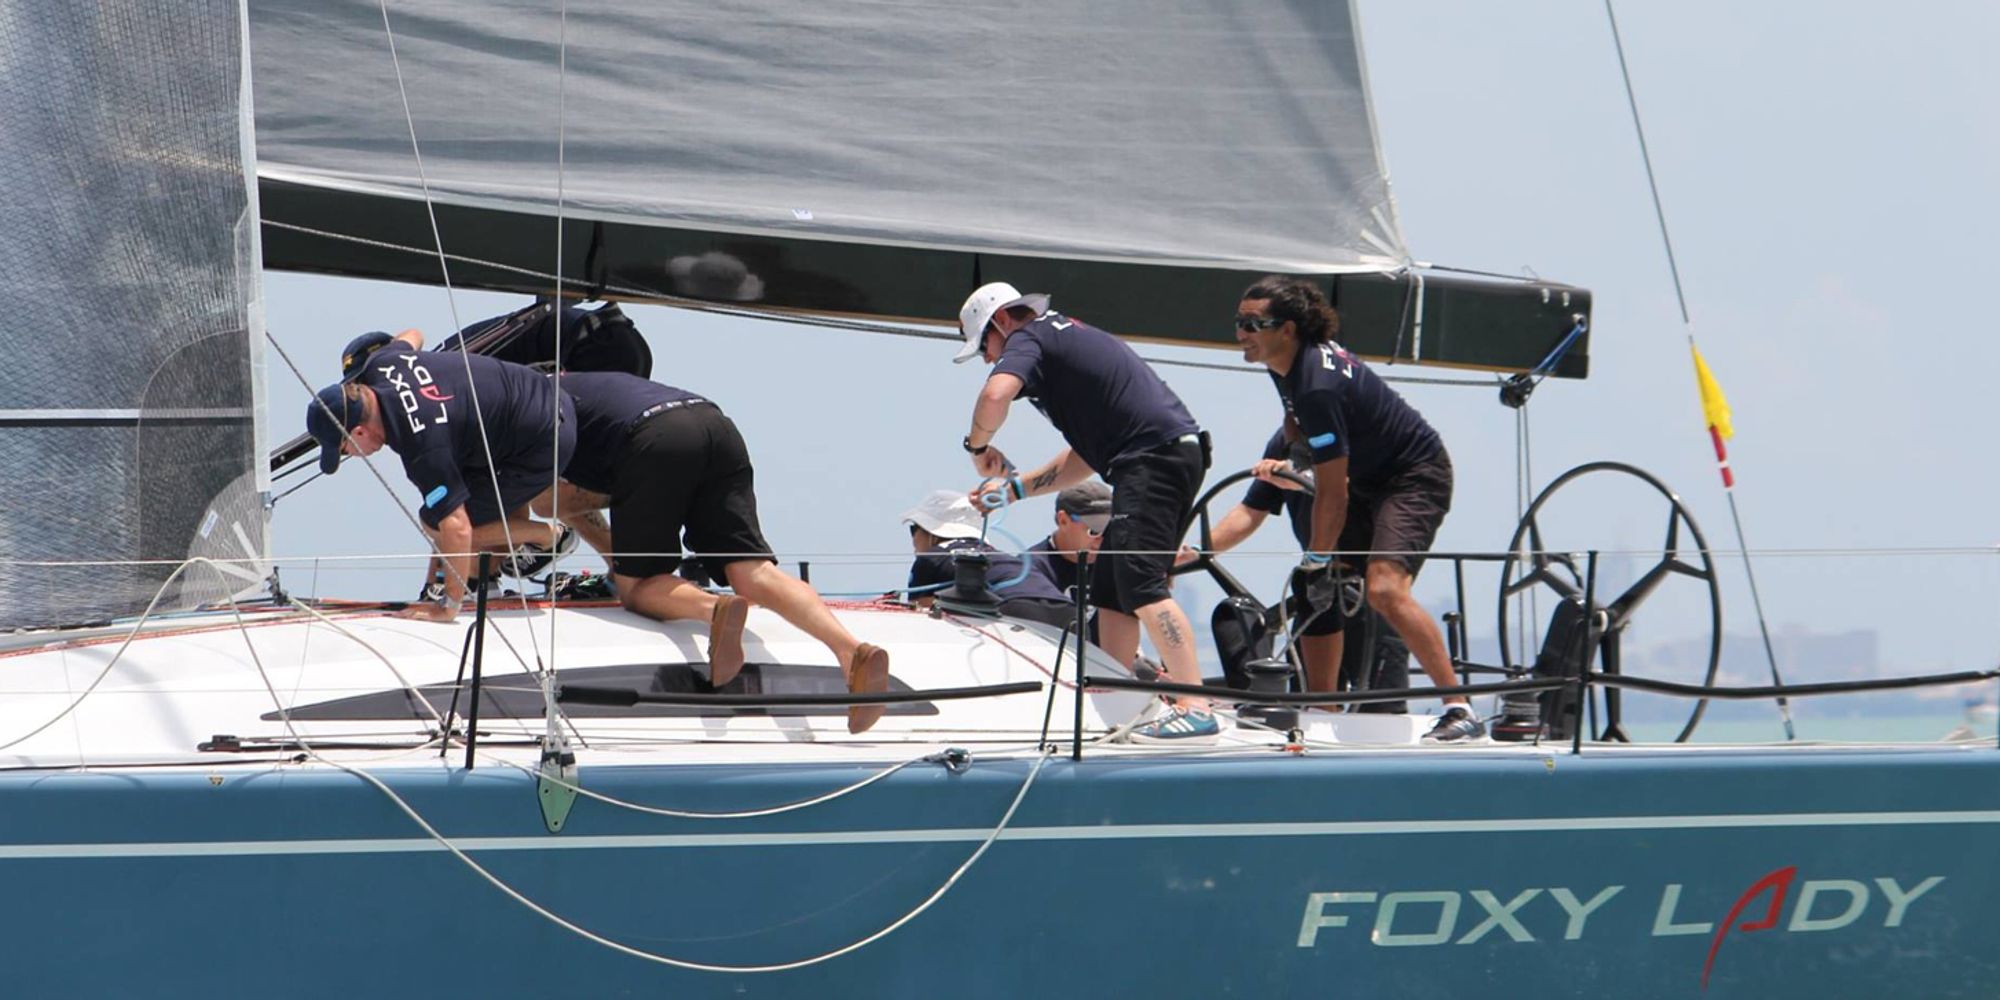 Teamwork demonstrated by sailors